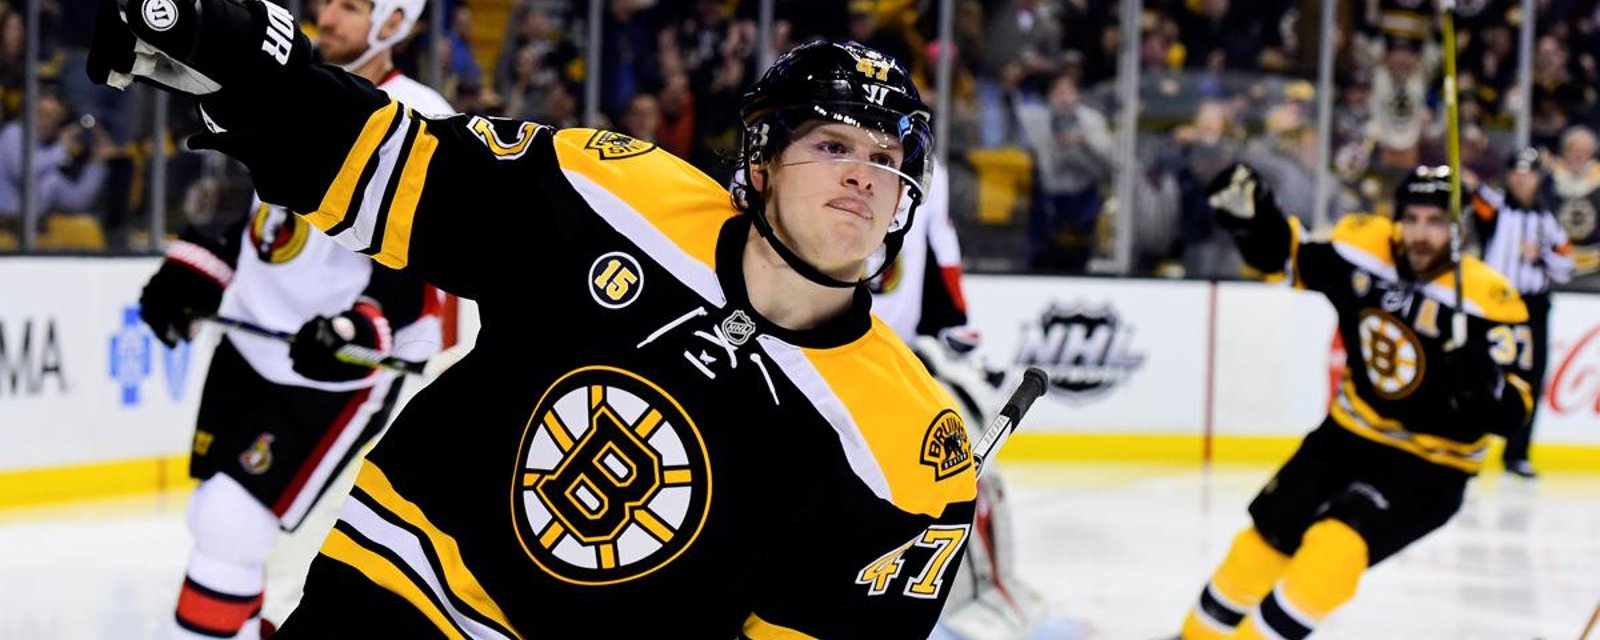 Fresh news about Krug's expected return! 